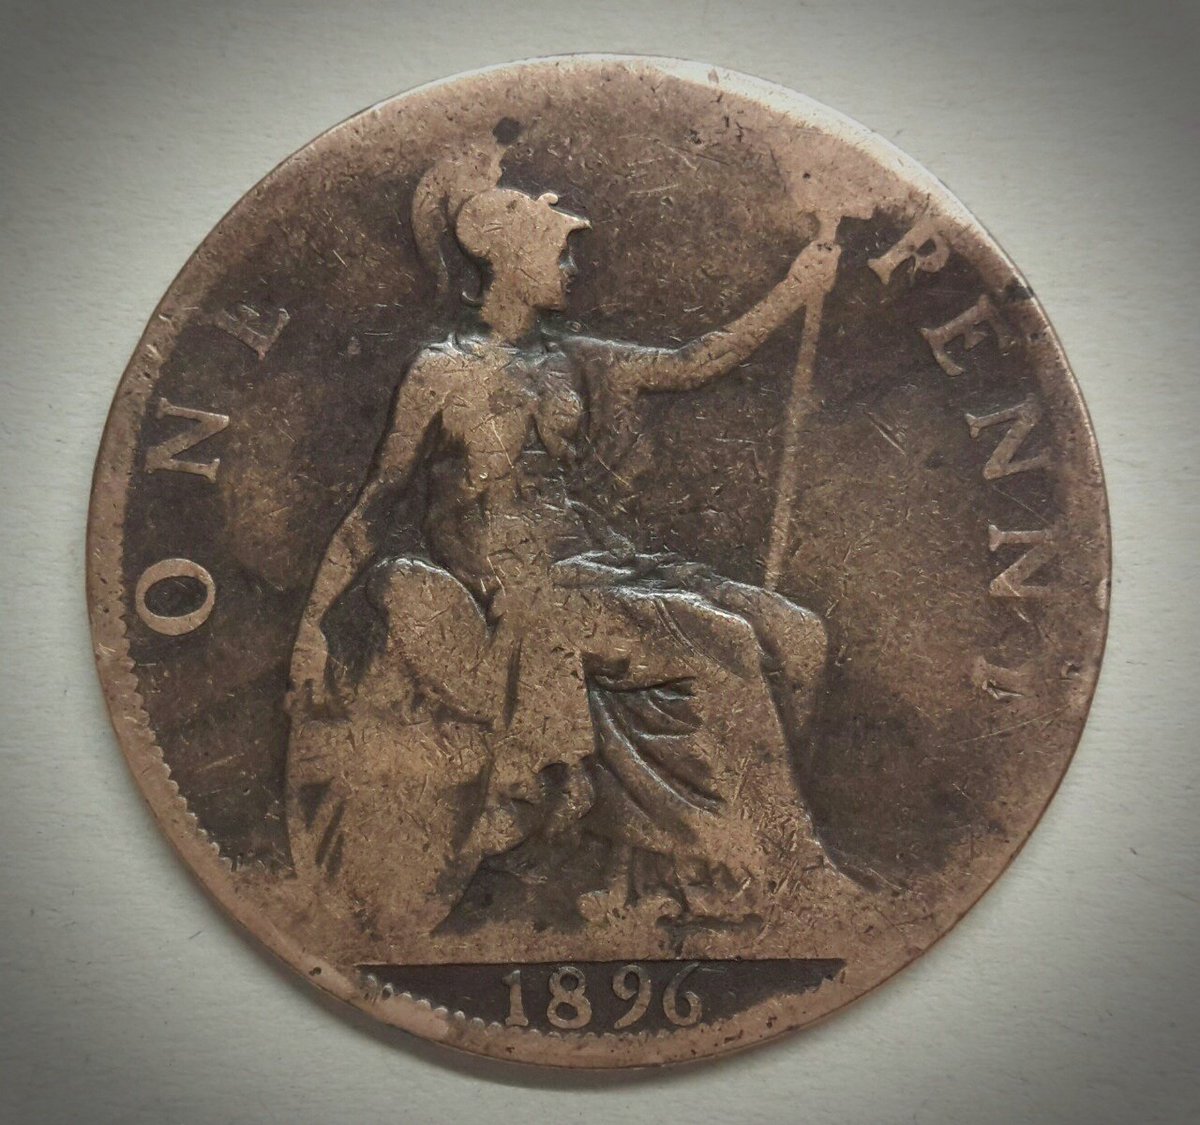 Hey, 23rd May is #NationalLuckyPennyDay 
A penny for your thoughts?😉